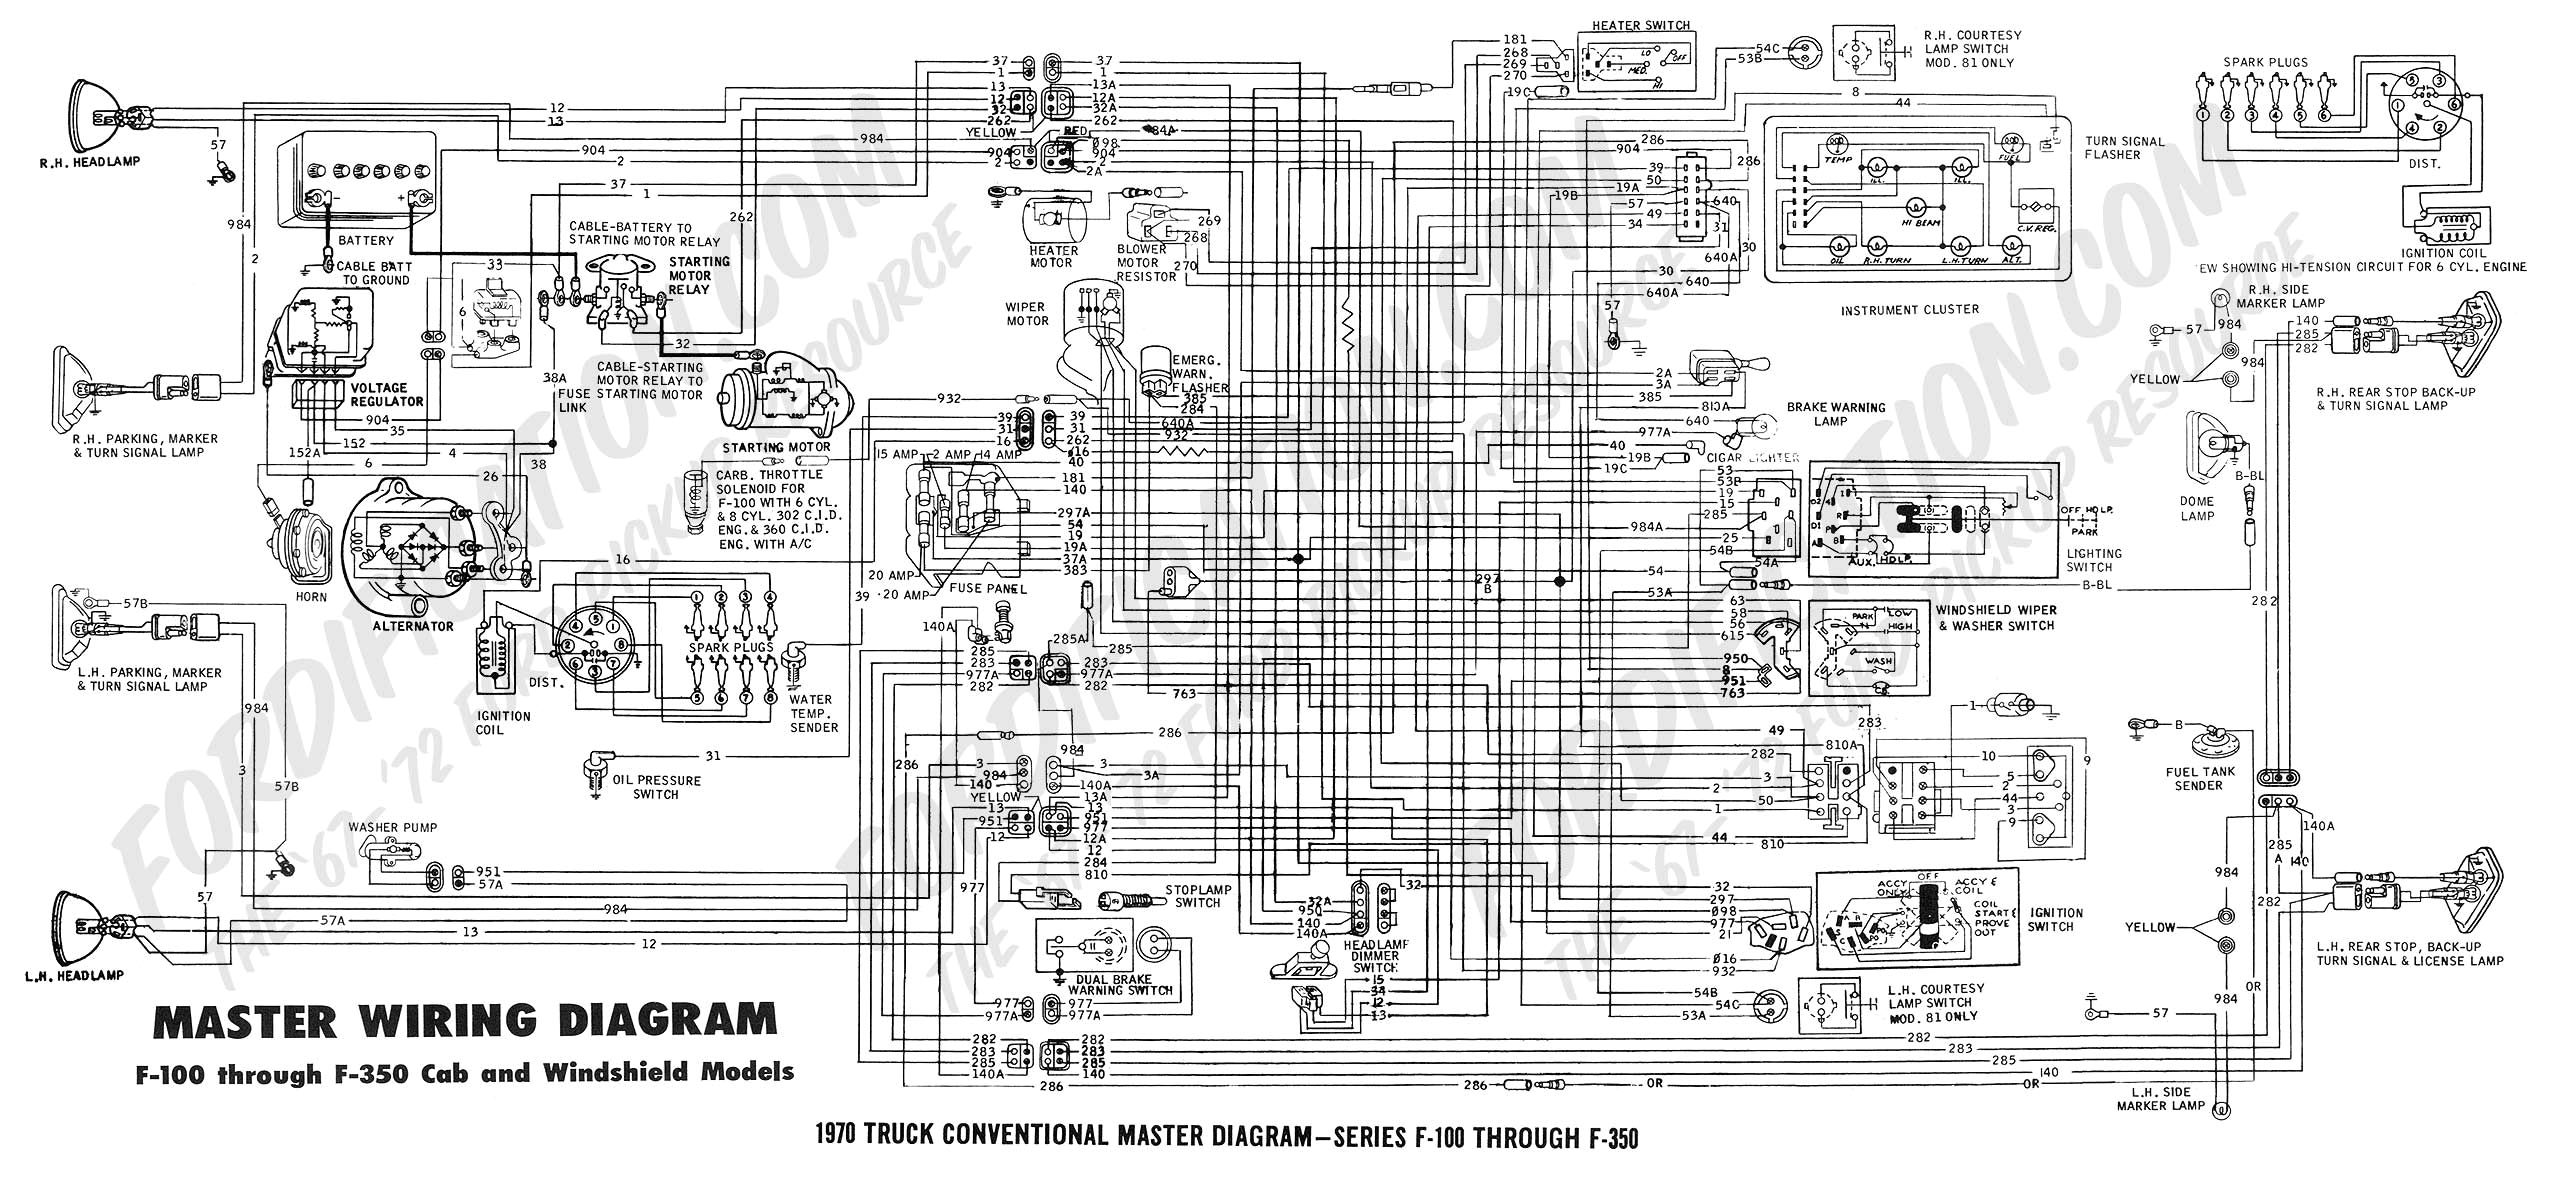 2005 f250 electrical diagram wiring diagram article 2005 f350 wiring schematic